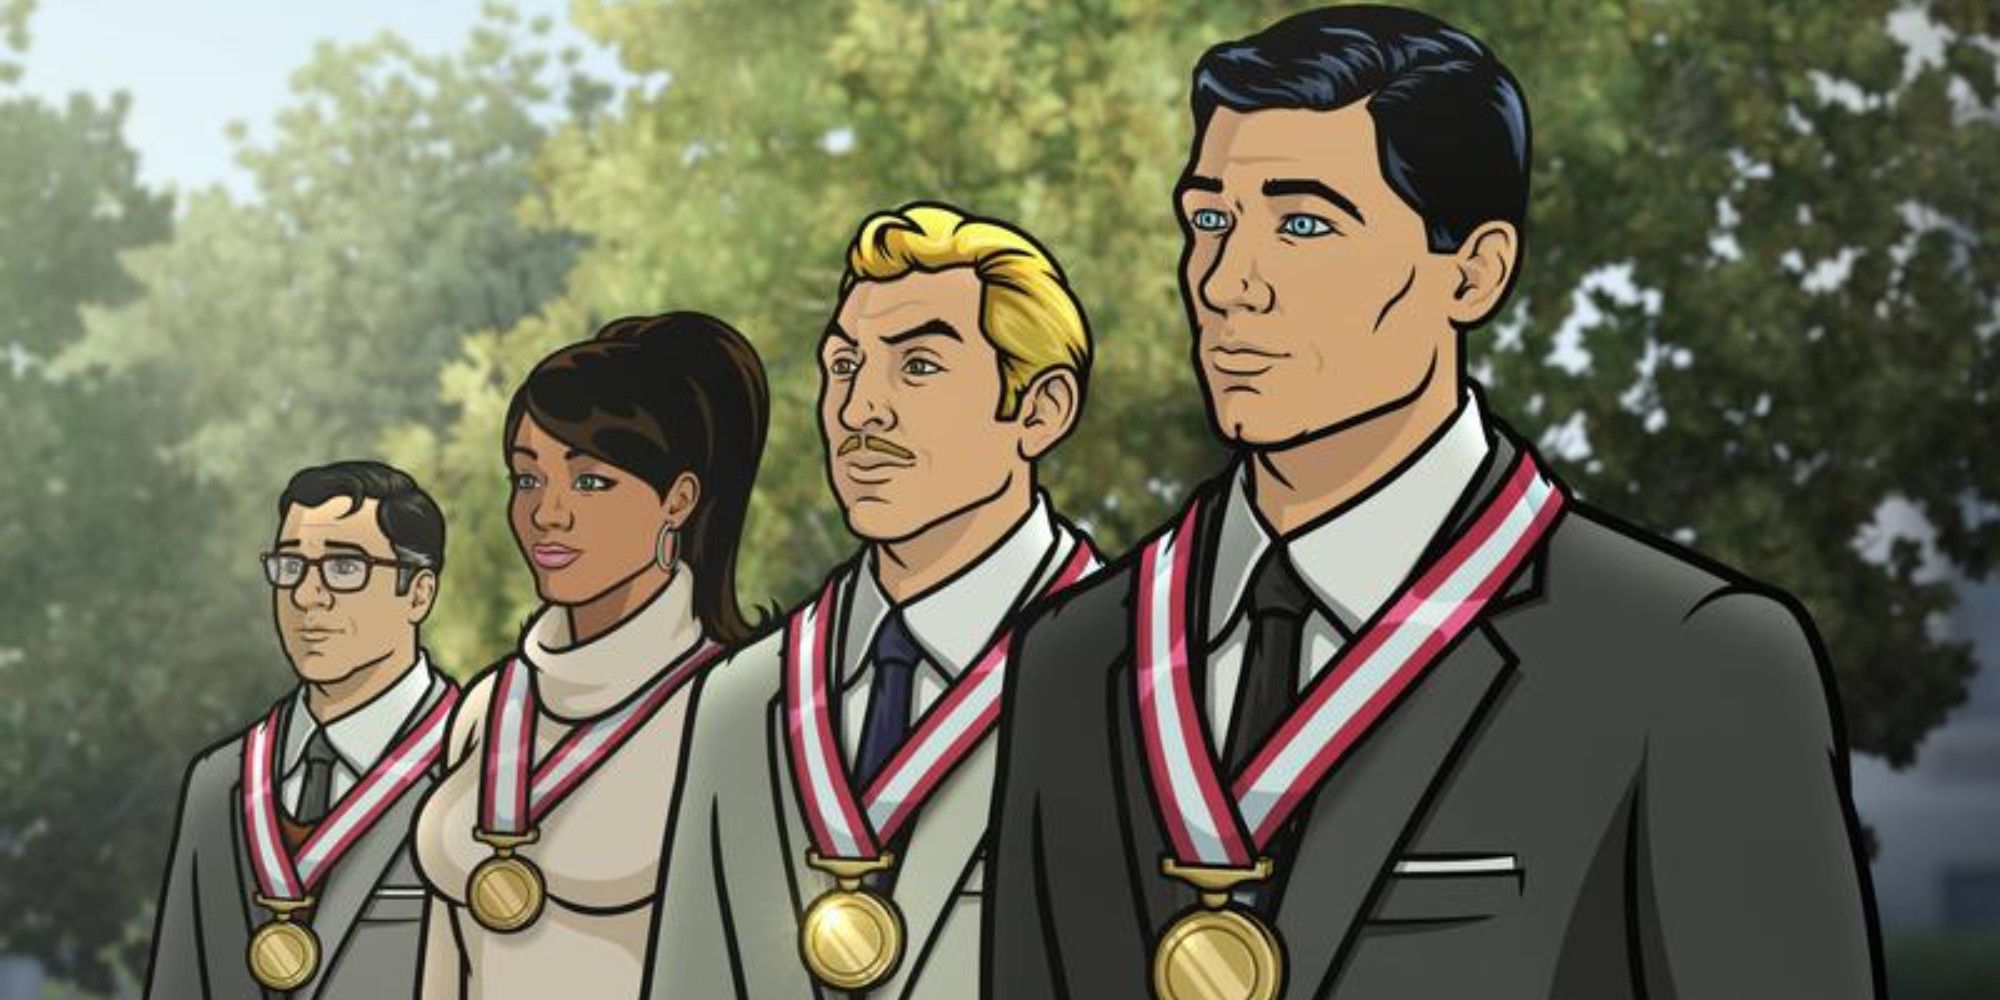 H Jon Benjamin as Sterling Archer, Adam Reed as Ray Gillette, Aisha Tyler as Lana Kane, Chris Parnell as Cyril Figgis Medal Ceremony in Archer